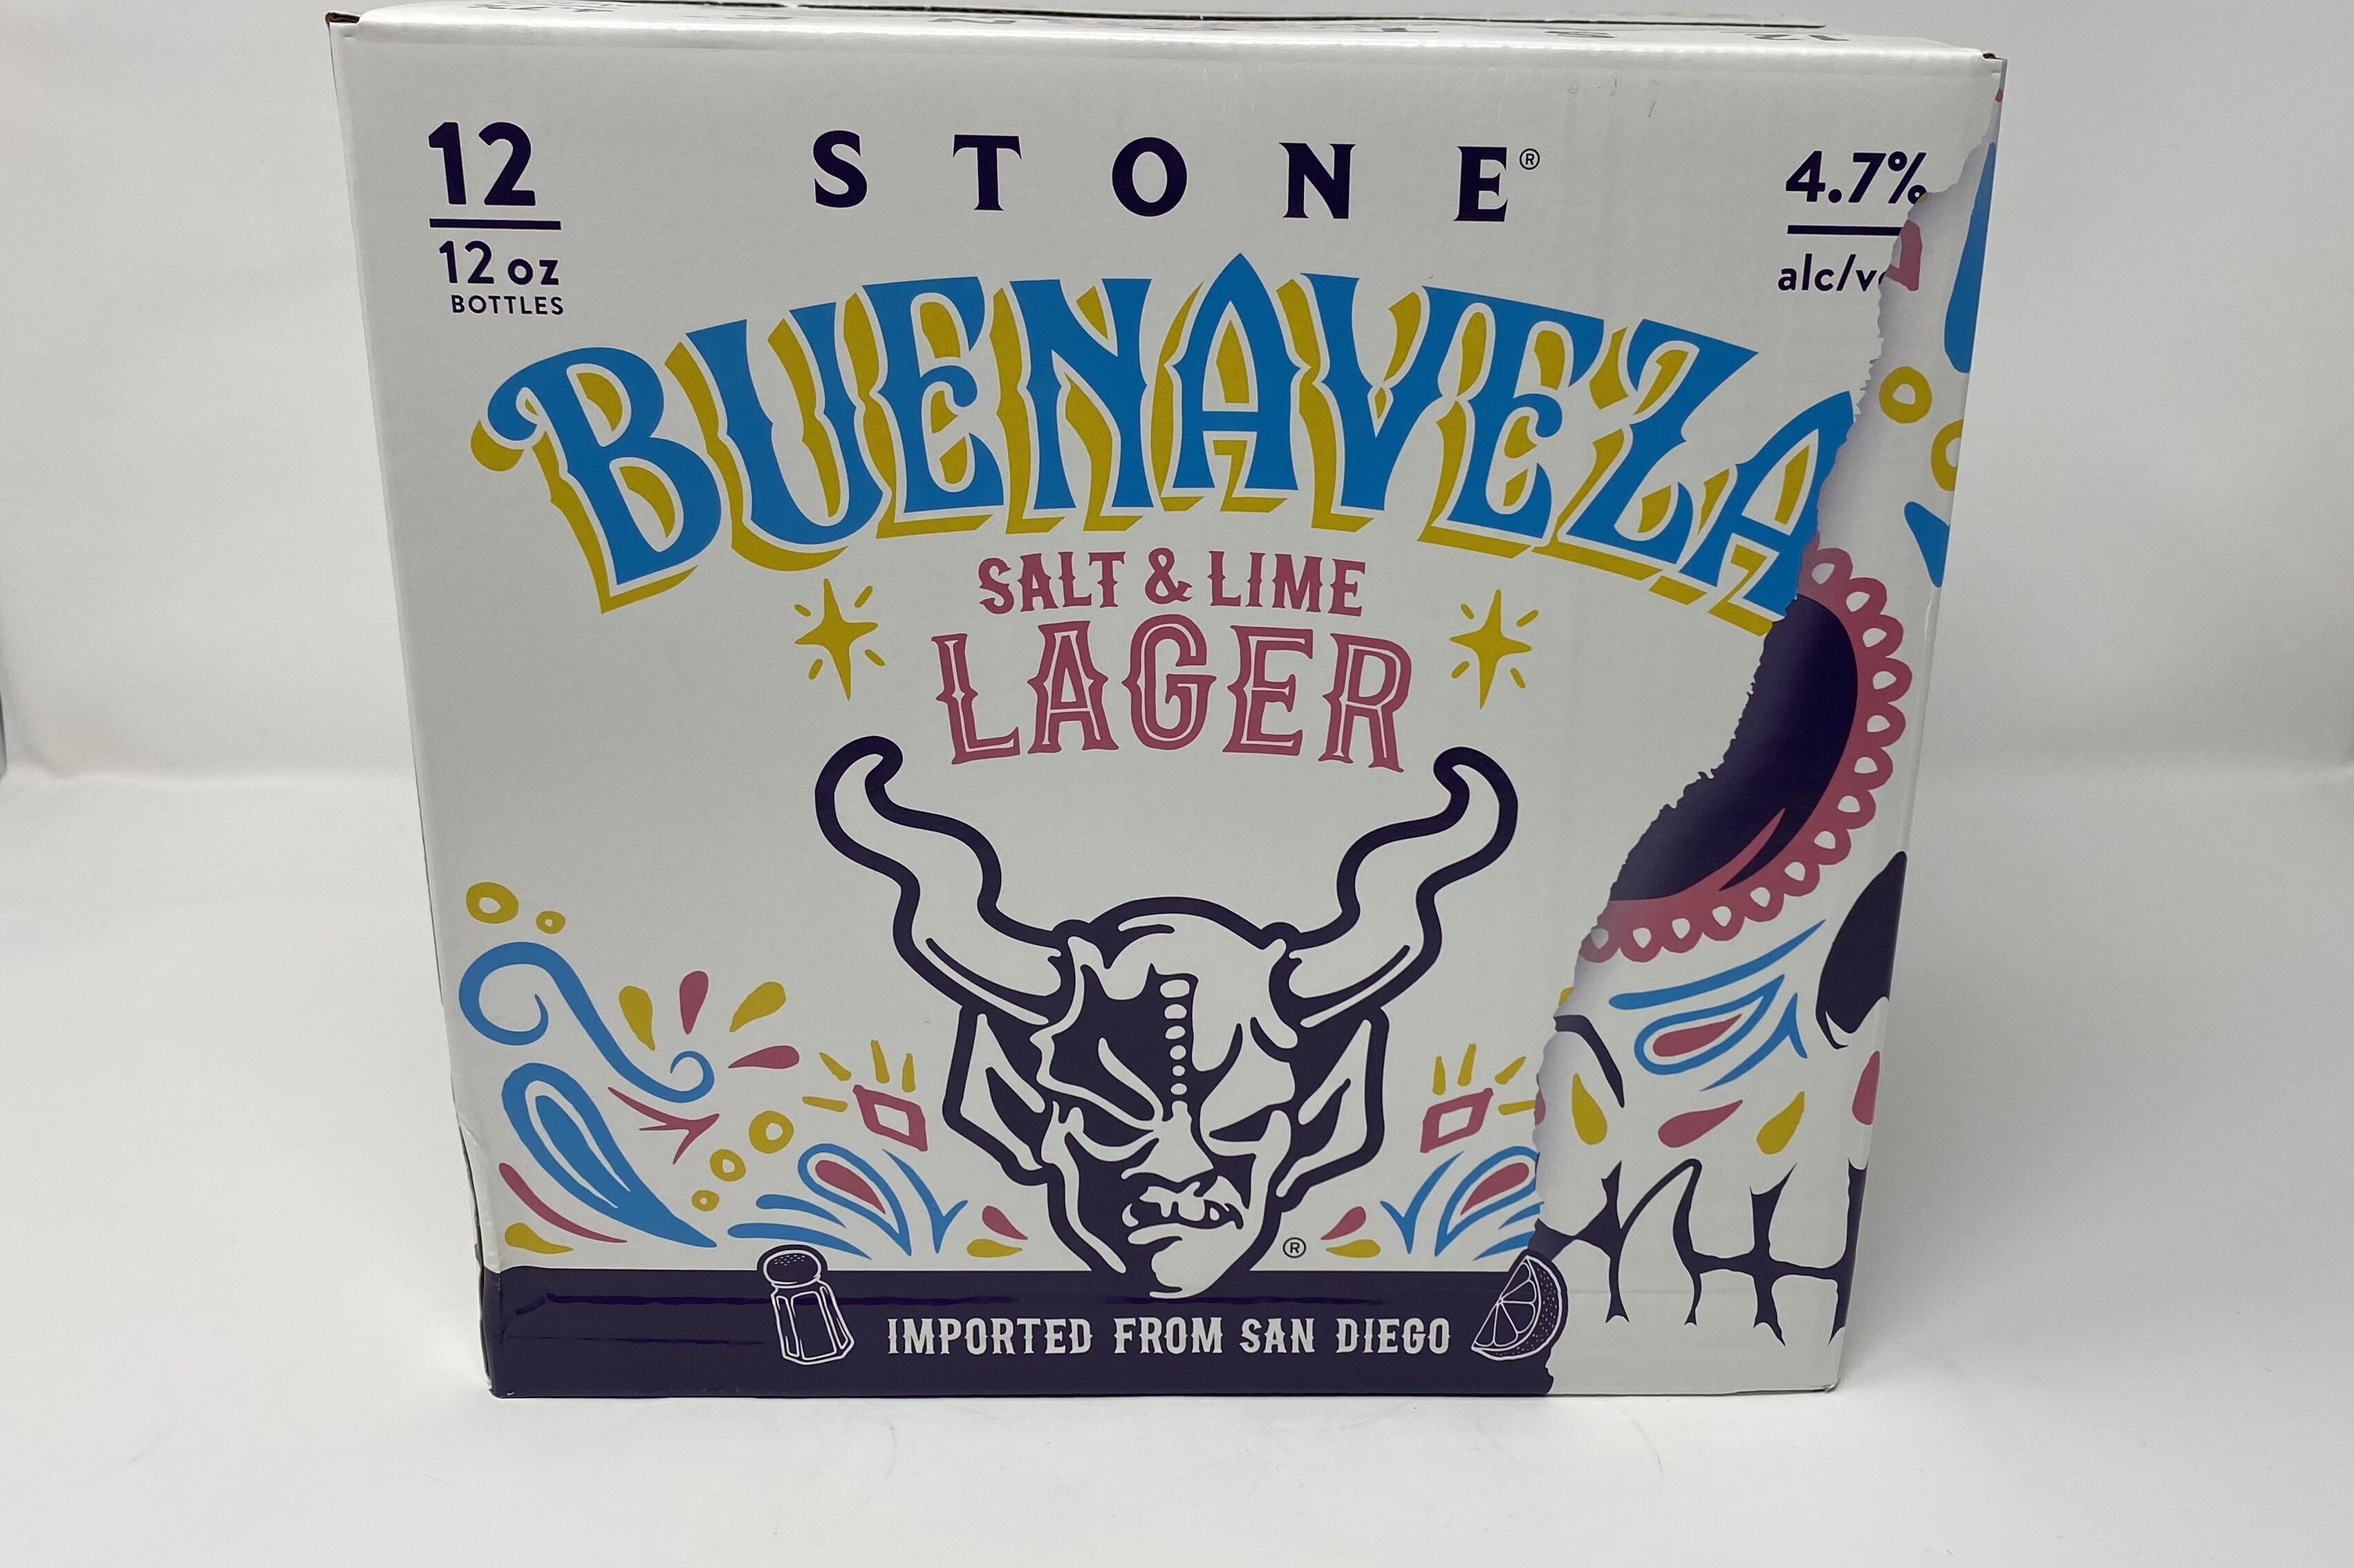 Stone Brewing Co., Buenaveza Salt & Lime Lager